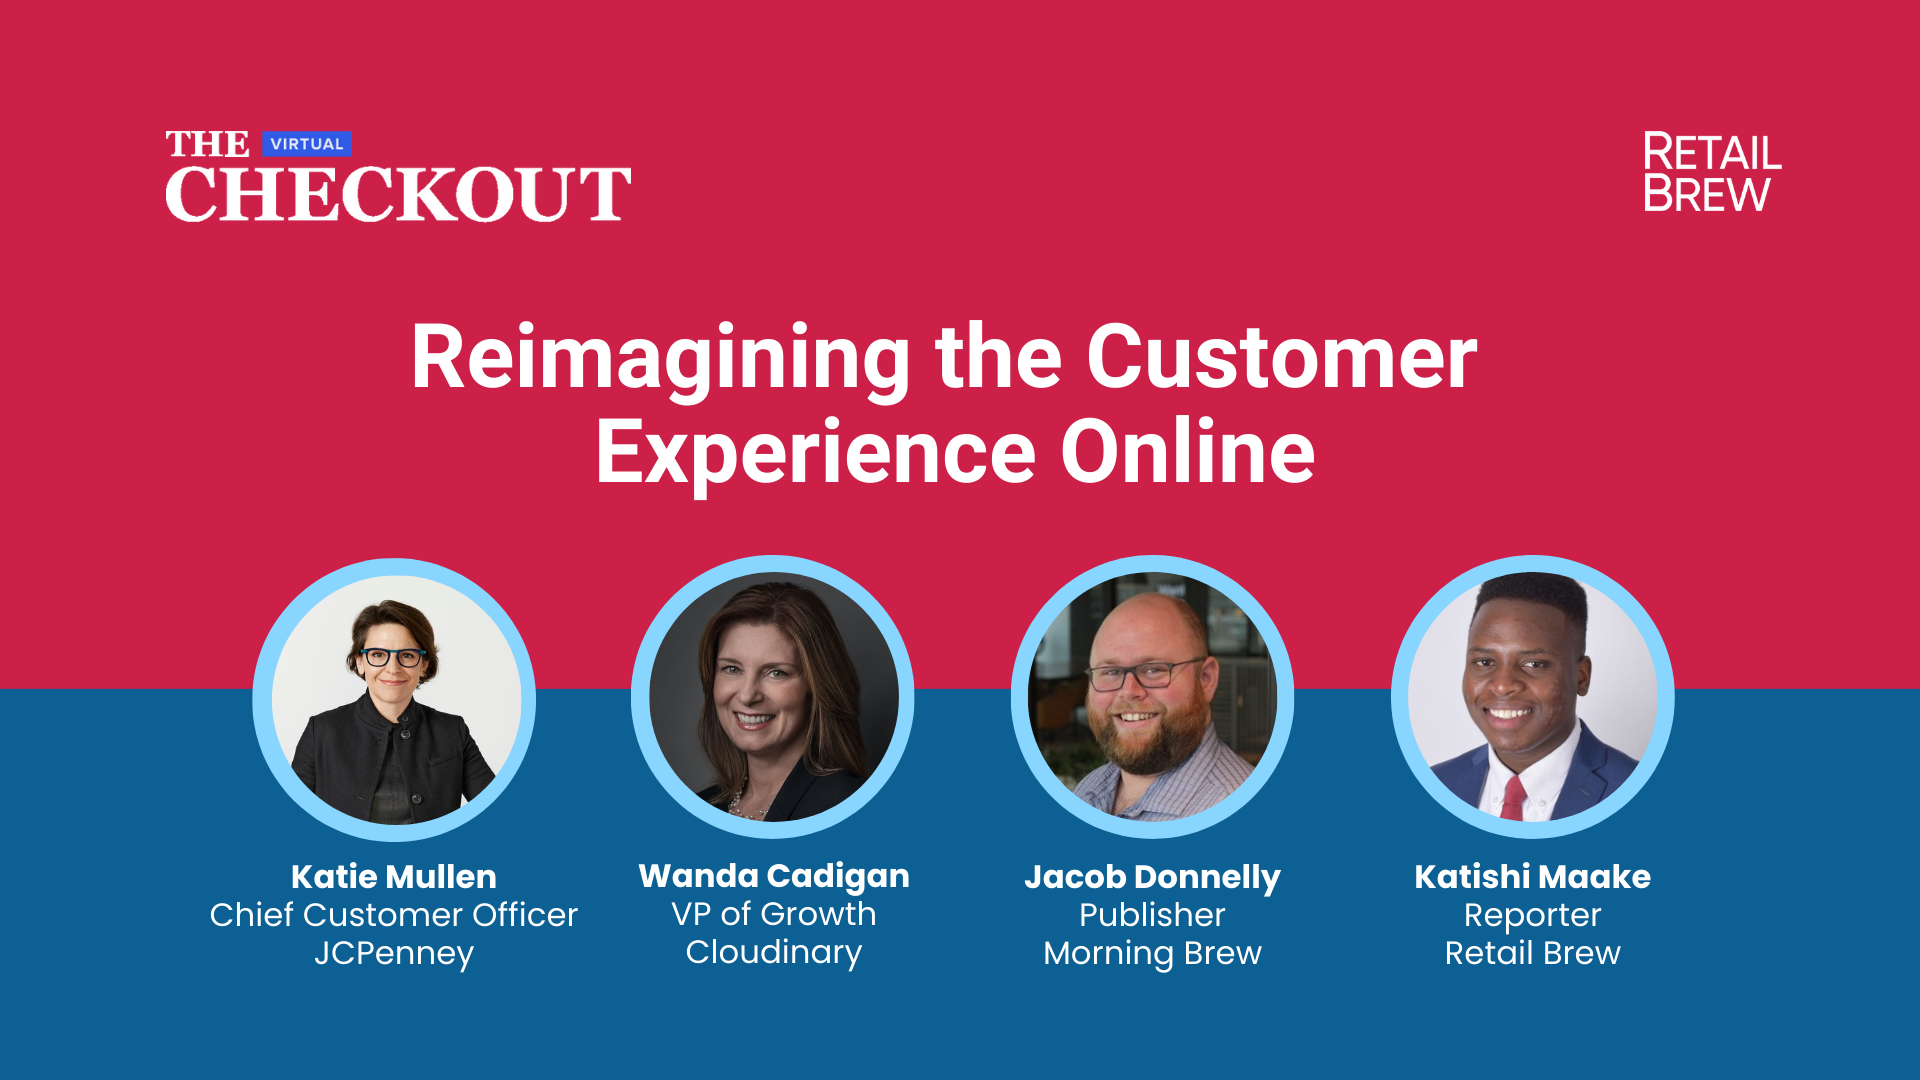 The Virtual Checkout logo next to a Retail Brew logo above "Reimagining the Customer Experience Online" text above four speaker headshots